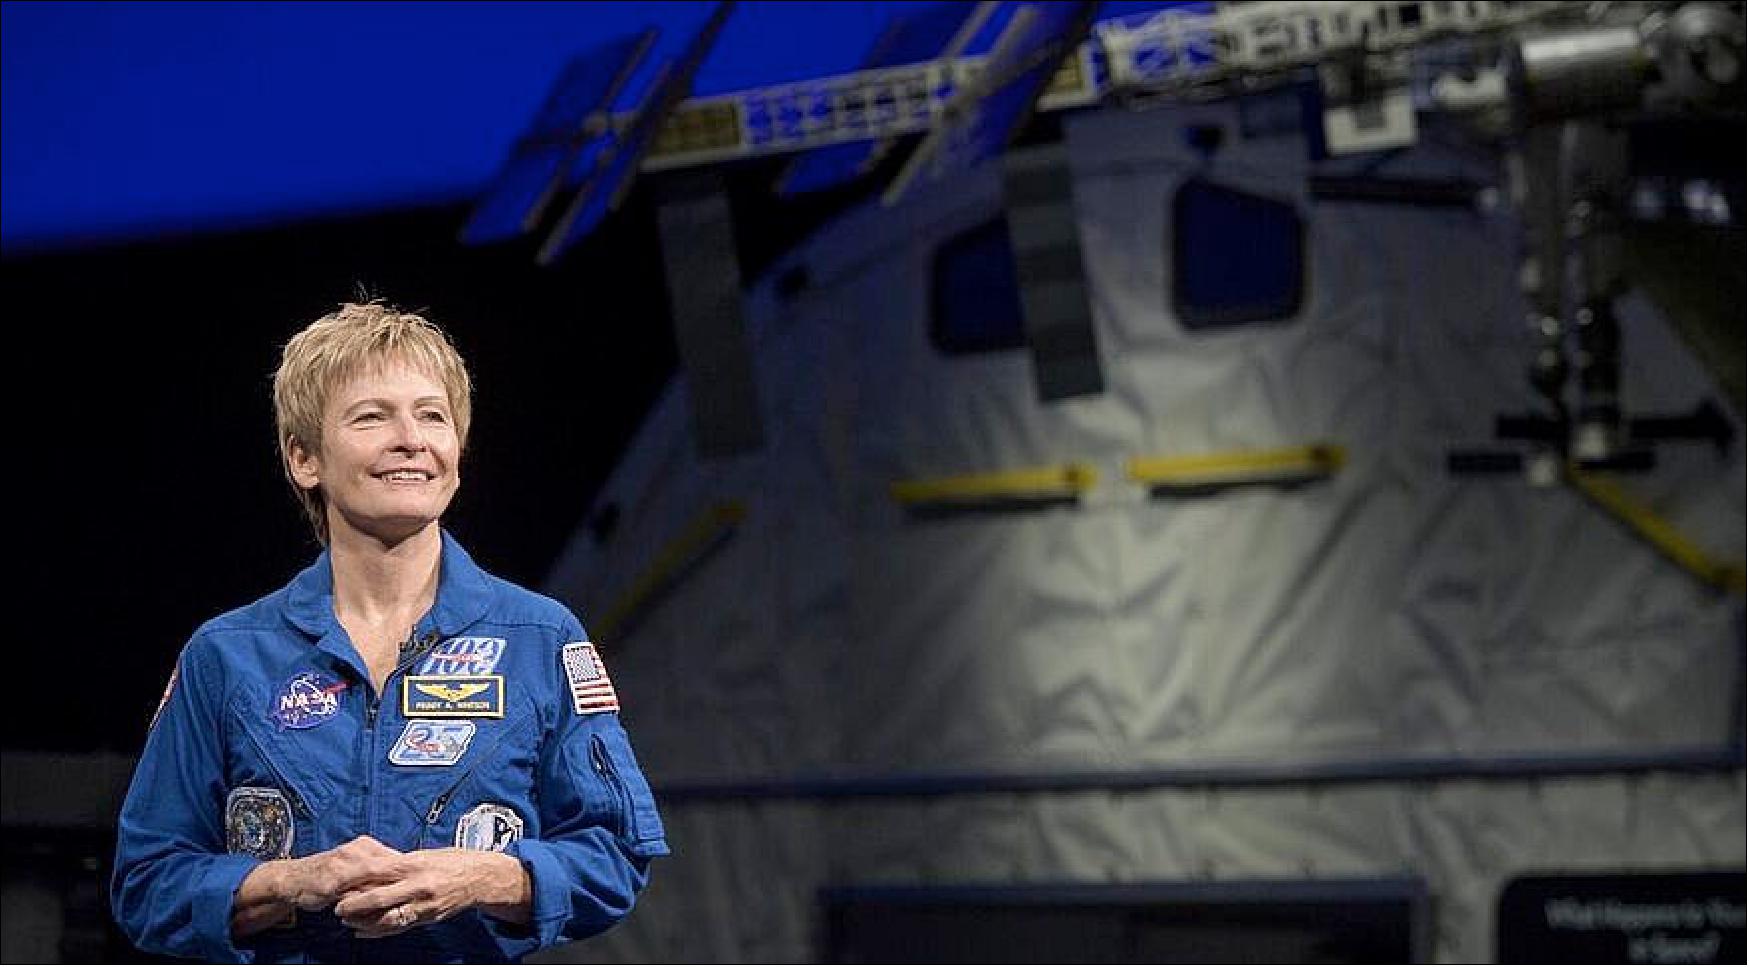 Figure 20: Former NASA astronaut Peggy Whitson, who spent 665 days in space on three long-duration ISS missions, will command Axiom Space's Ax-2 commercial mission to the station (image credit: NASA/Joel Kowsky)